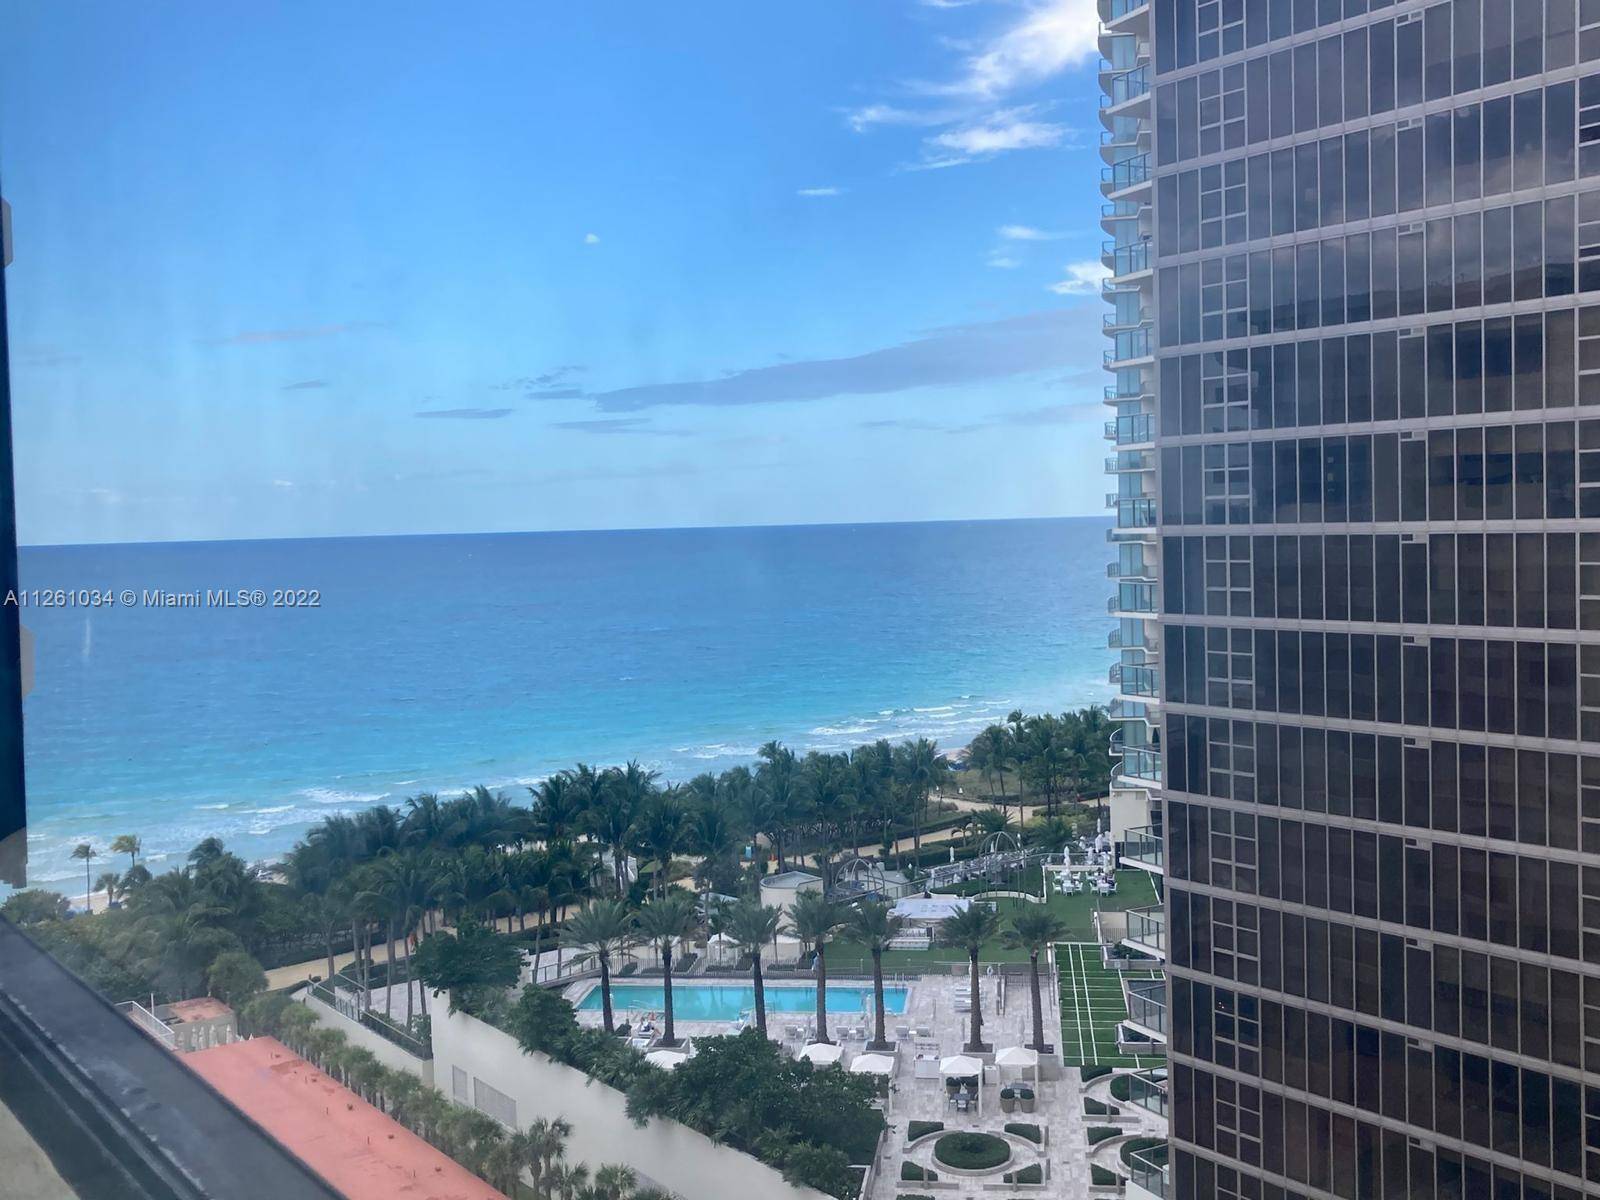 Stunning views from this high floor R line exposure of the intracoastal, the ocean, and the beautiful skyline of Miami.